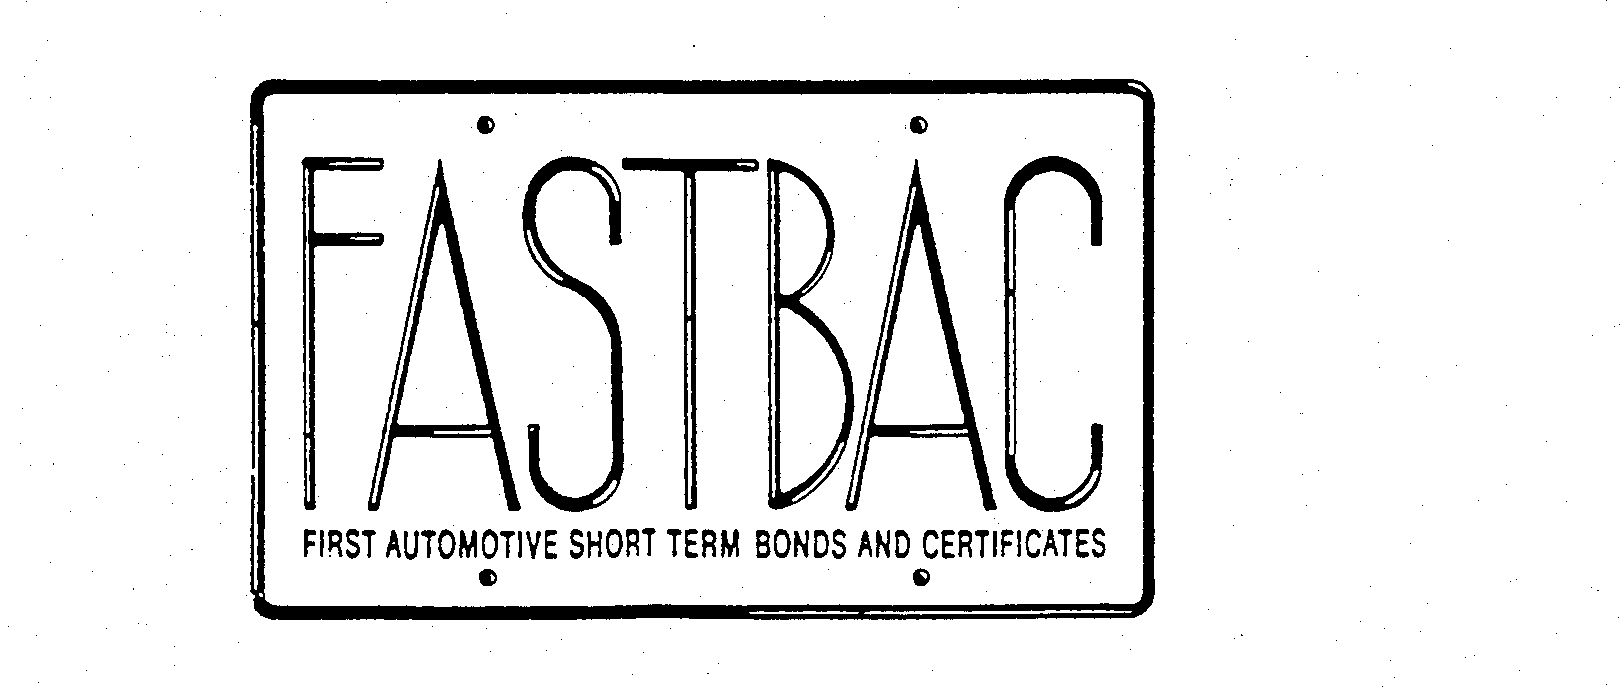  FASTBAC FIRST AUTOMOTIVE SHORT TERM BONDS AND CERTIFICATES